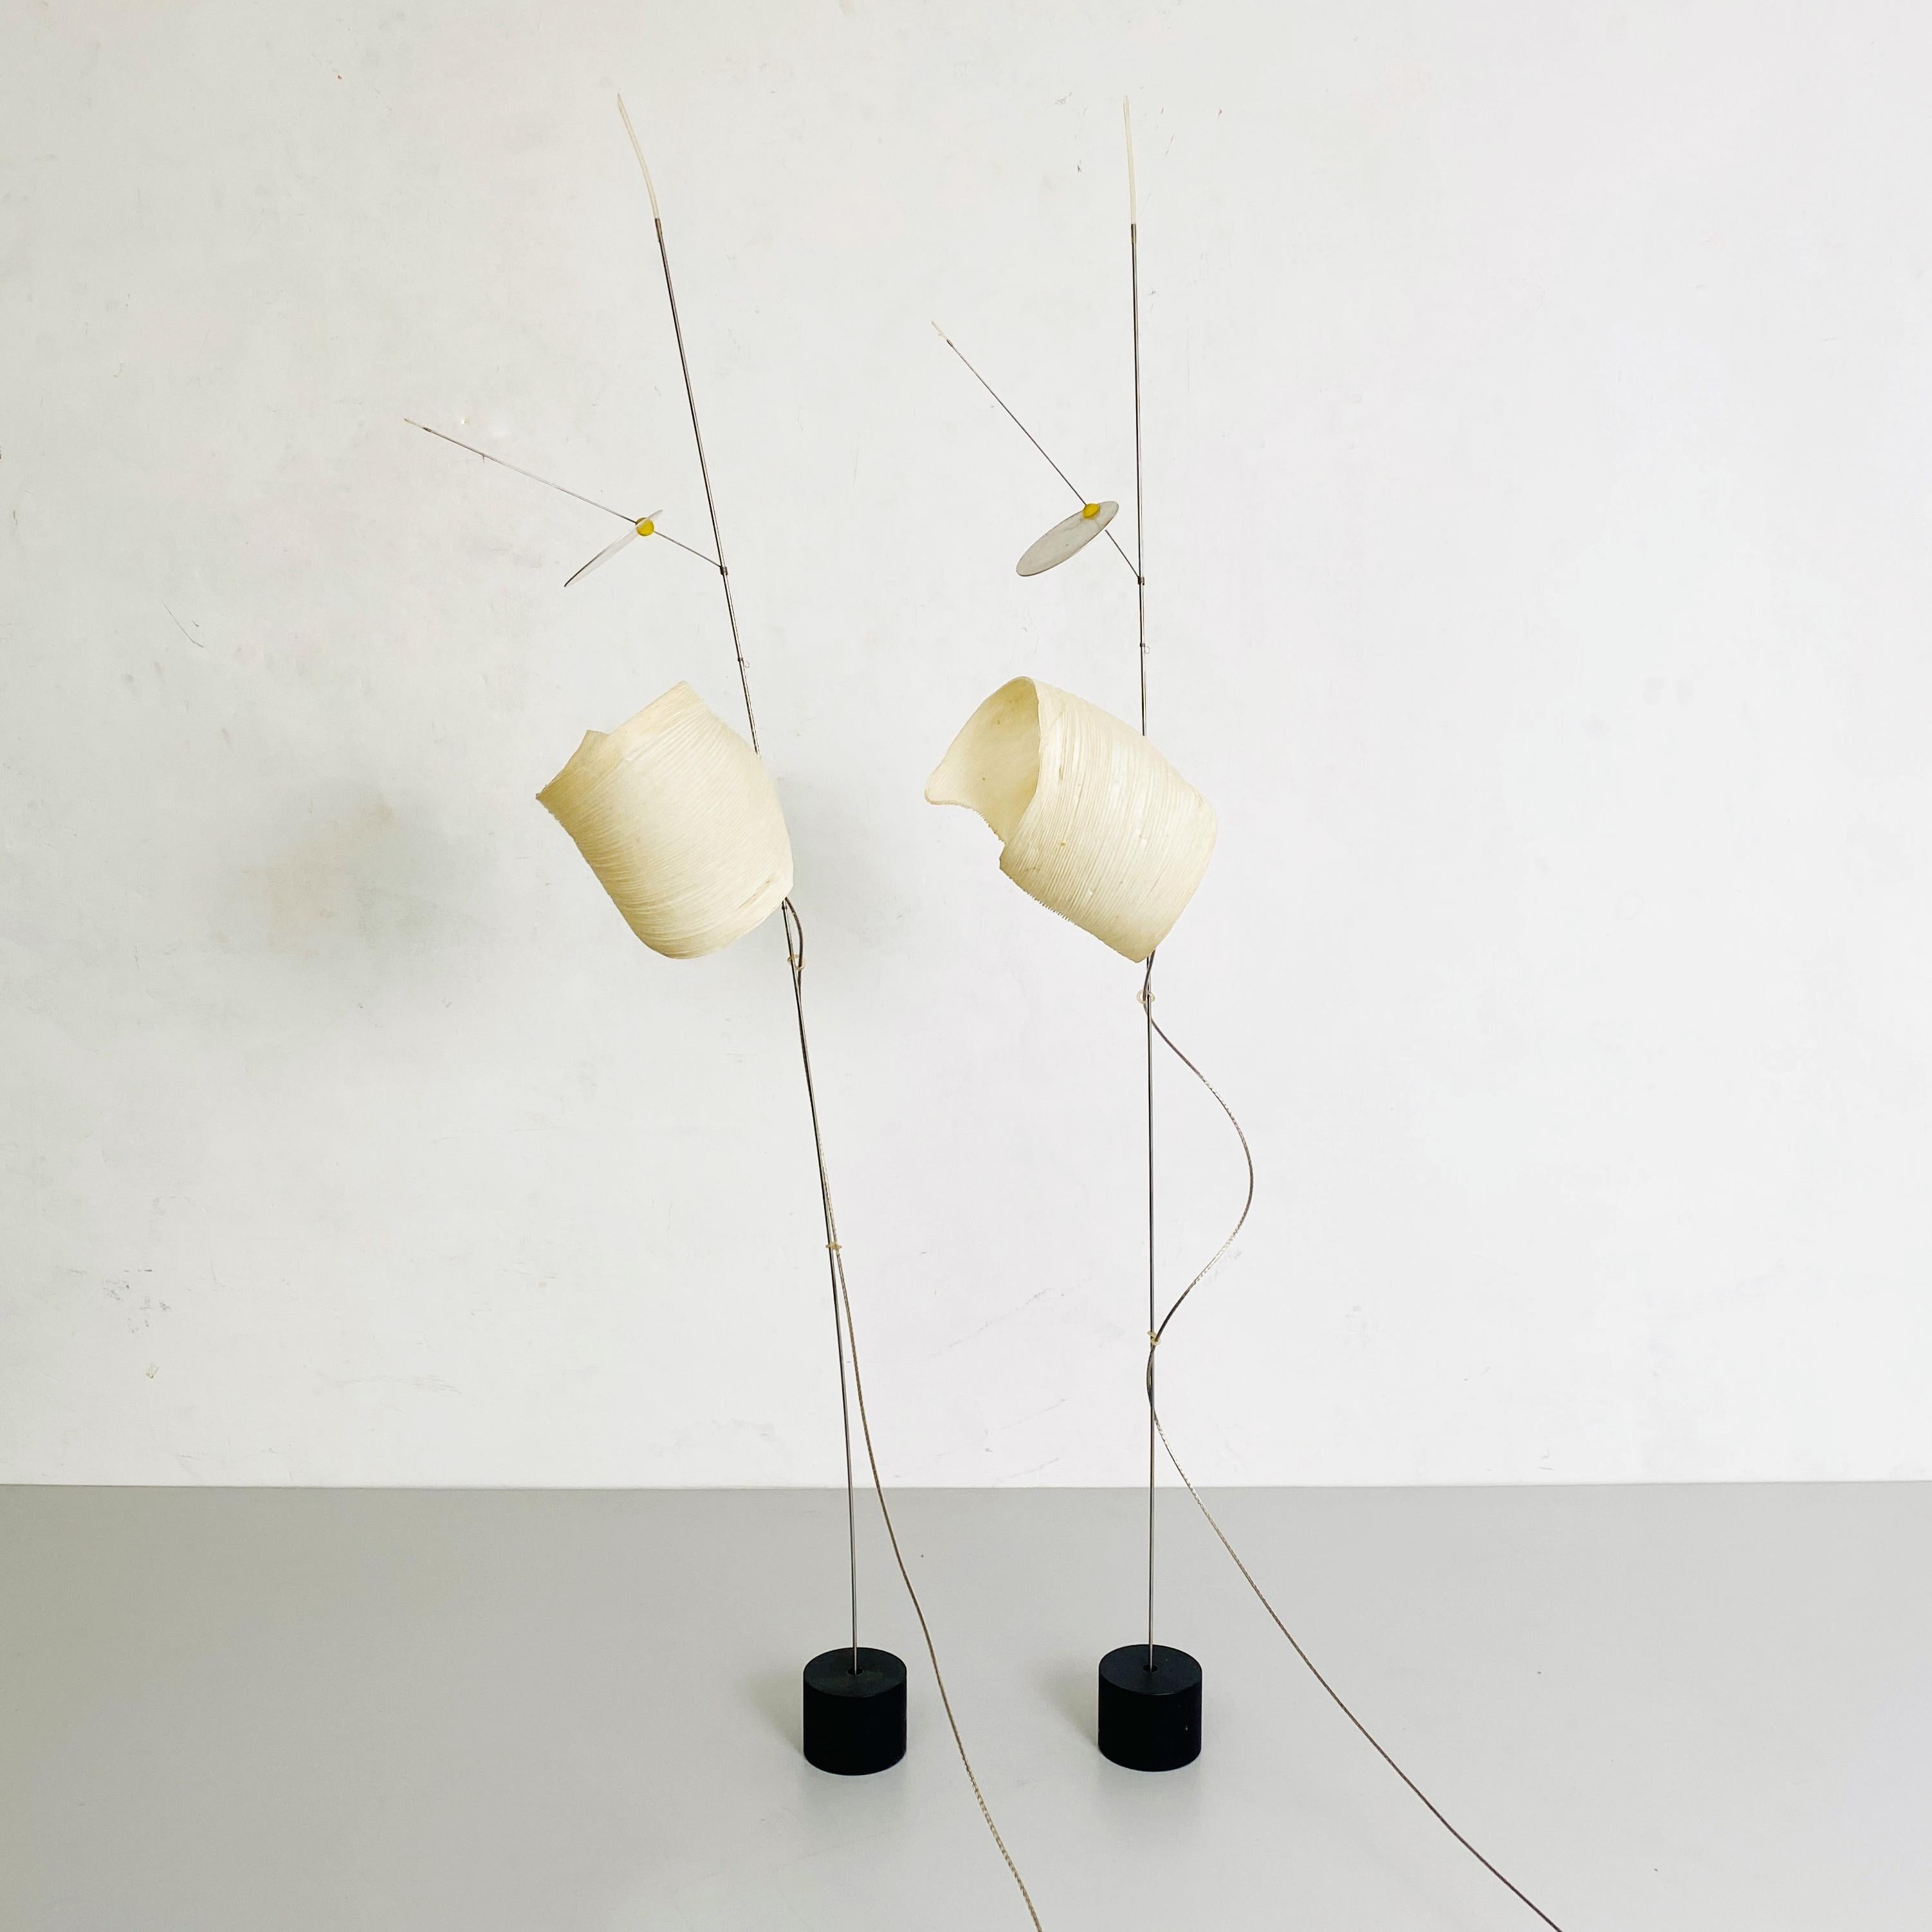 Watapunga lamps by Ingo Maurer and Dagmar Mombacher for Ingo Maurer, 1980s
Watapunga lamps from the MaMo Nouchies series. The lamp is composed of a metal base and stem, an aluminum lamp holder, the sculptural part is in natural paper and mirror.